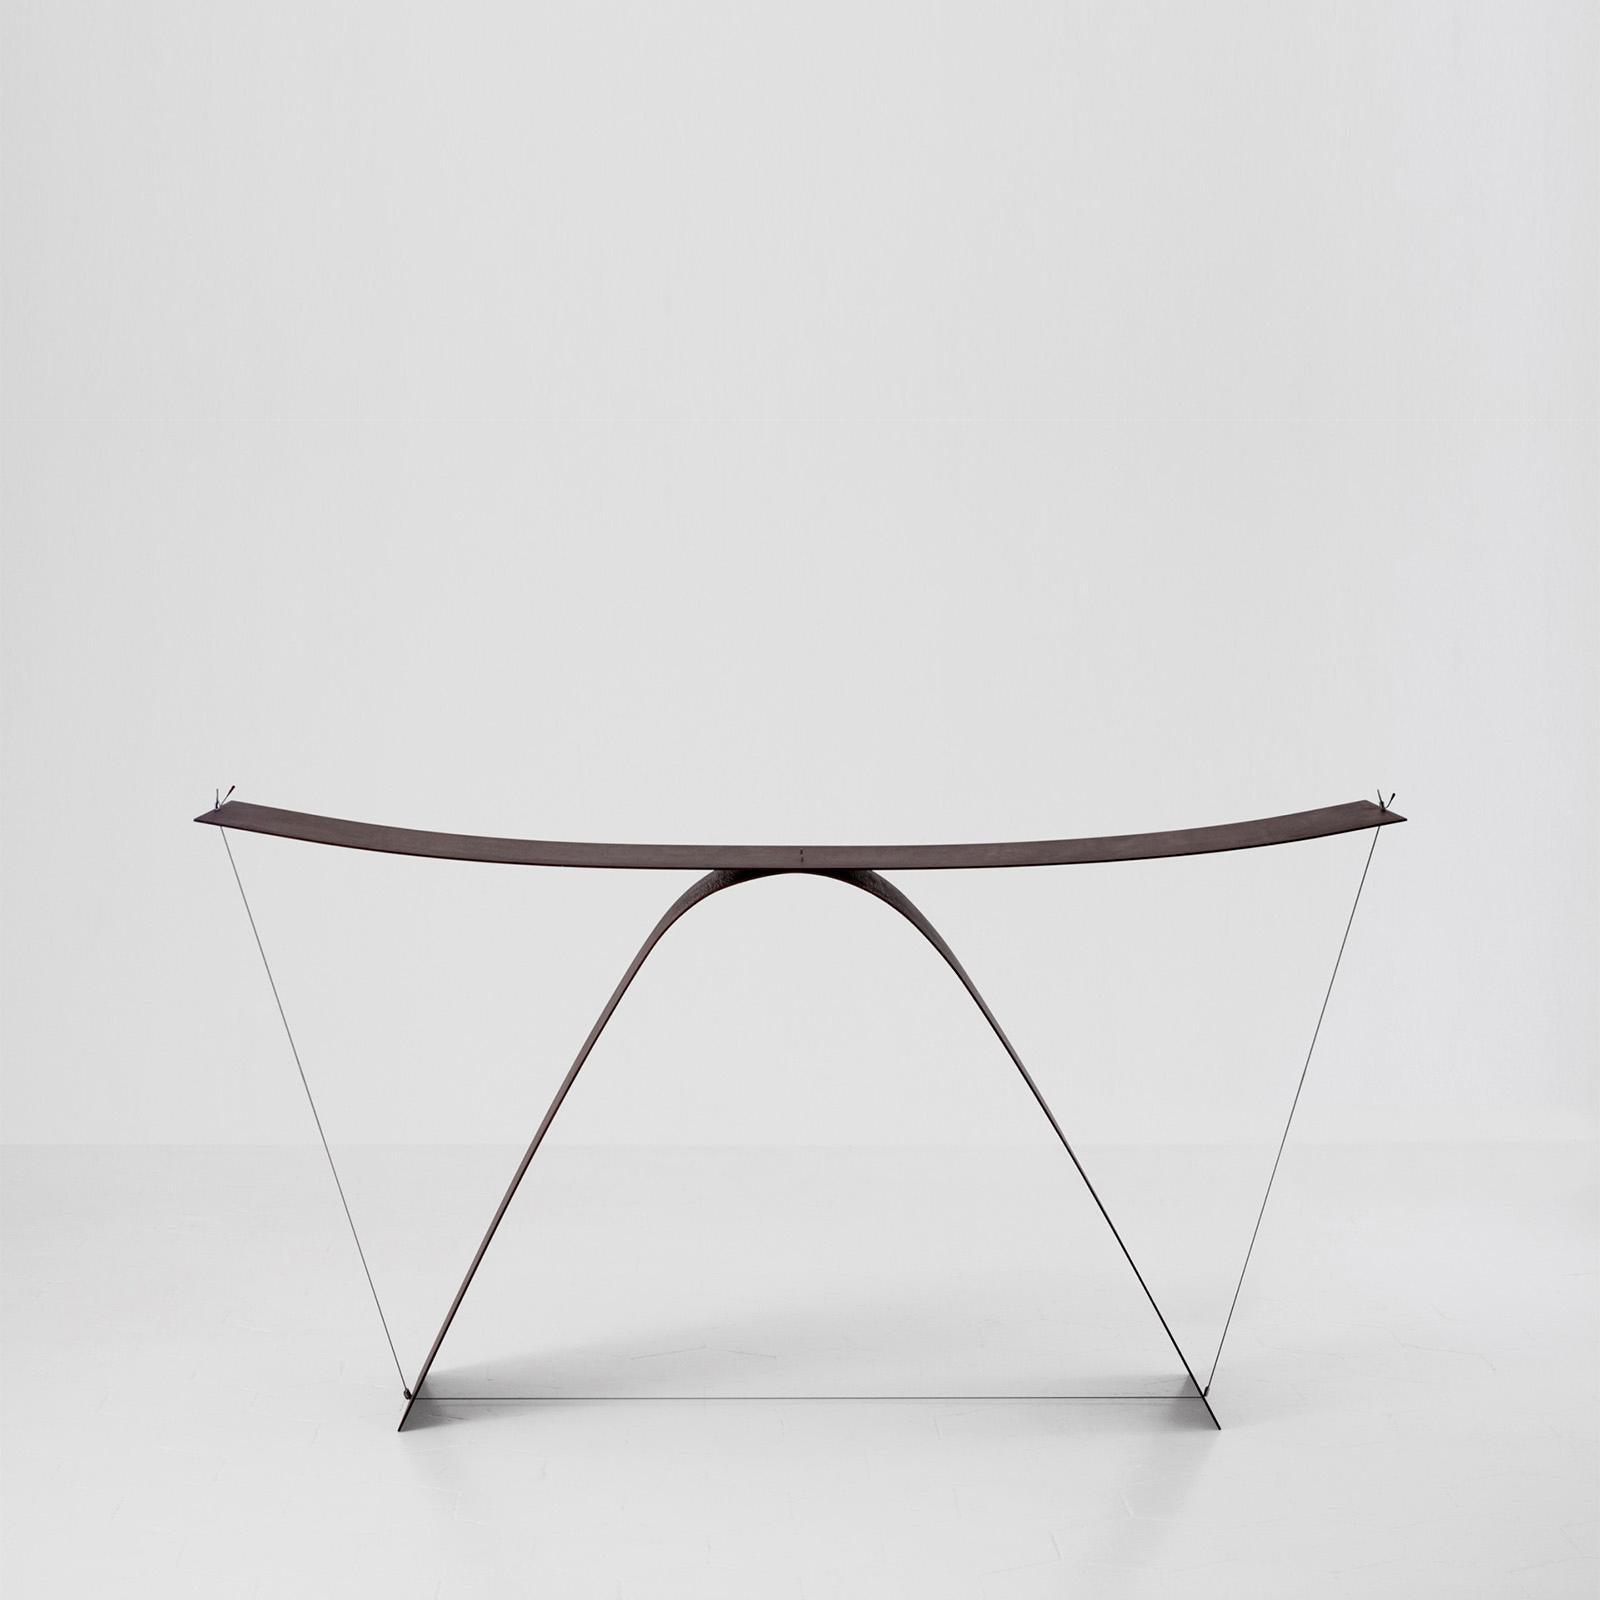 Modern Equilibrium Console Table in Steel and Aluminum by Guglielmo Poletti